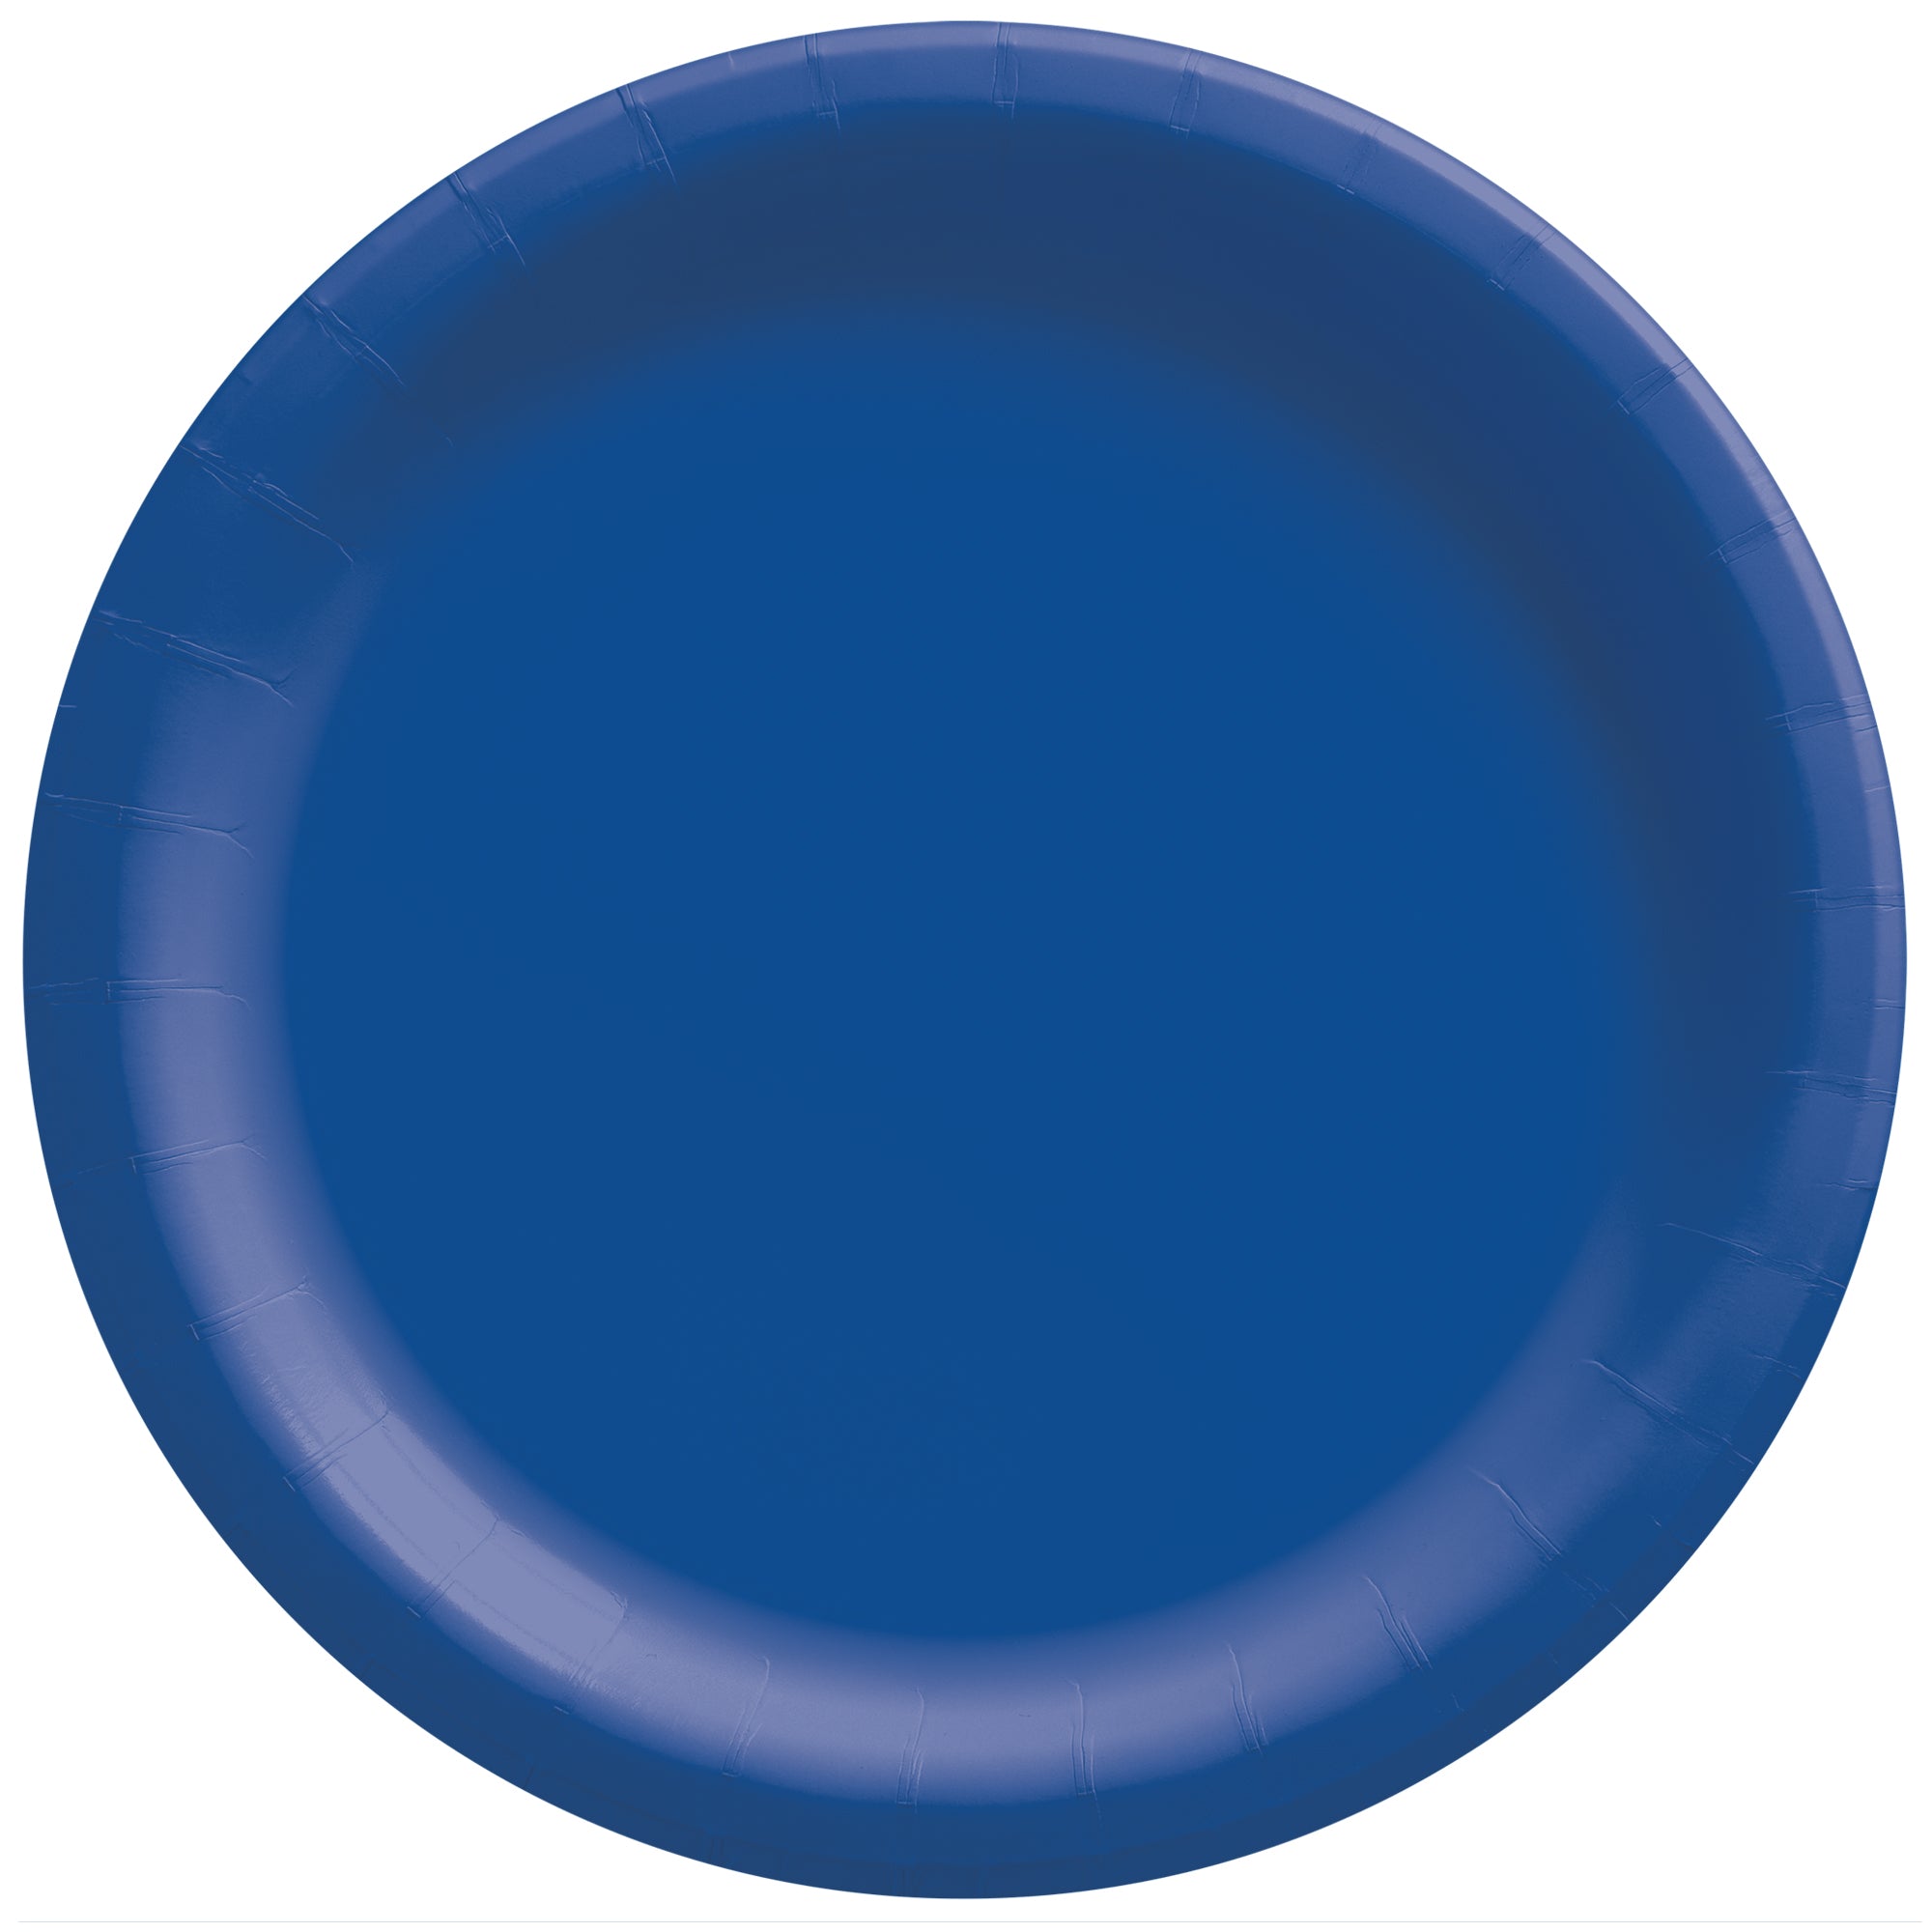 Bright Royal Blue 6 3/4" Round Paper Plates,